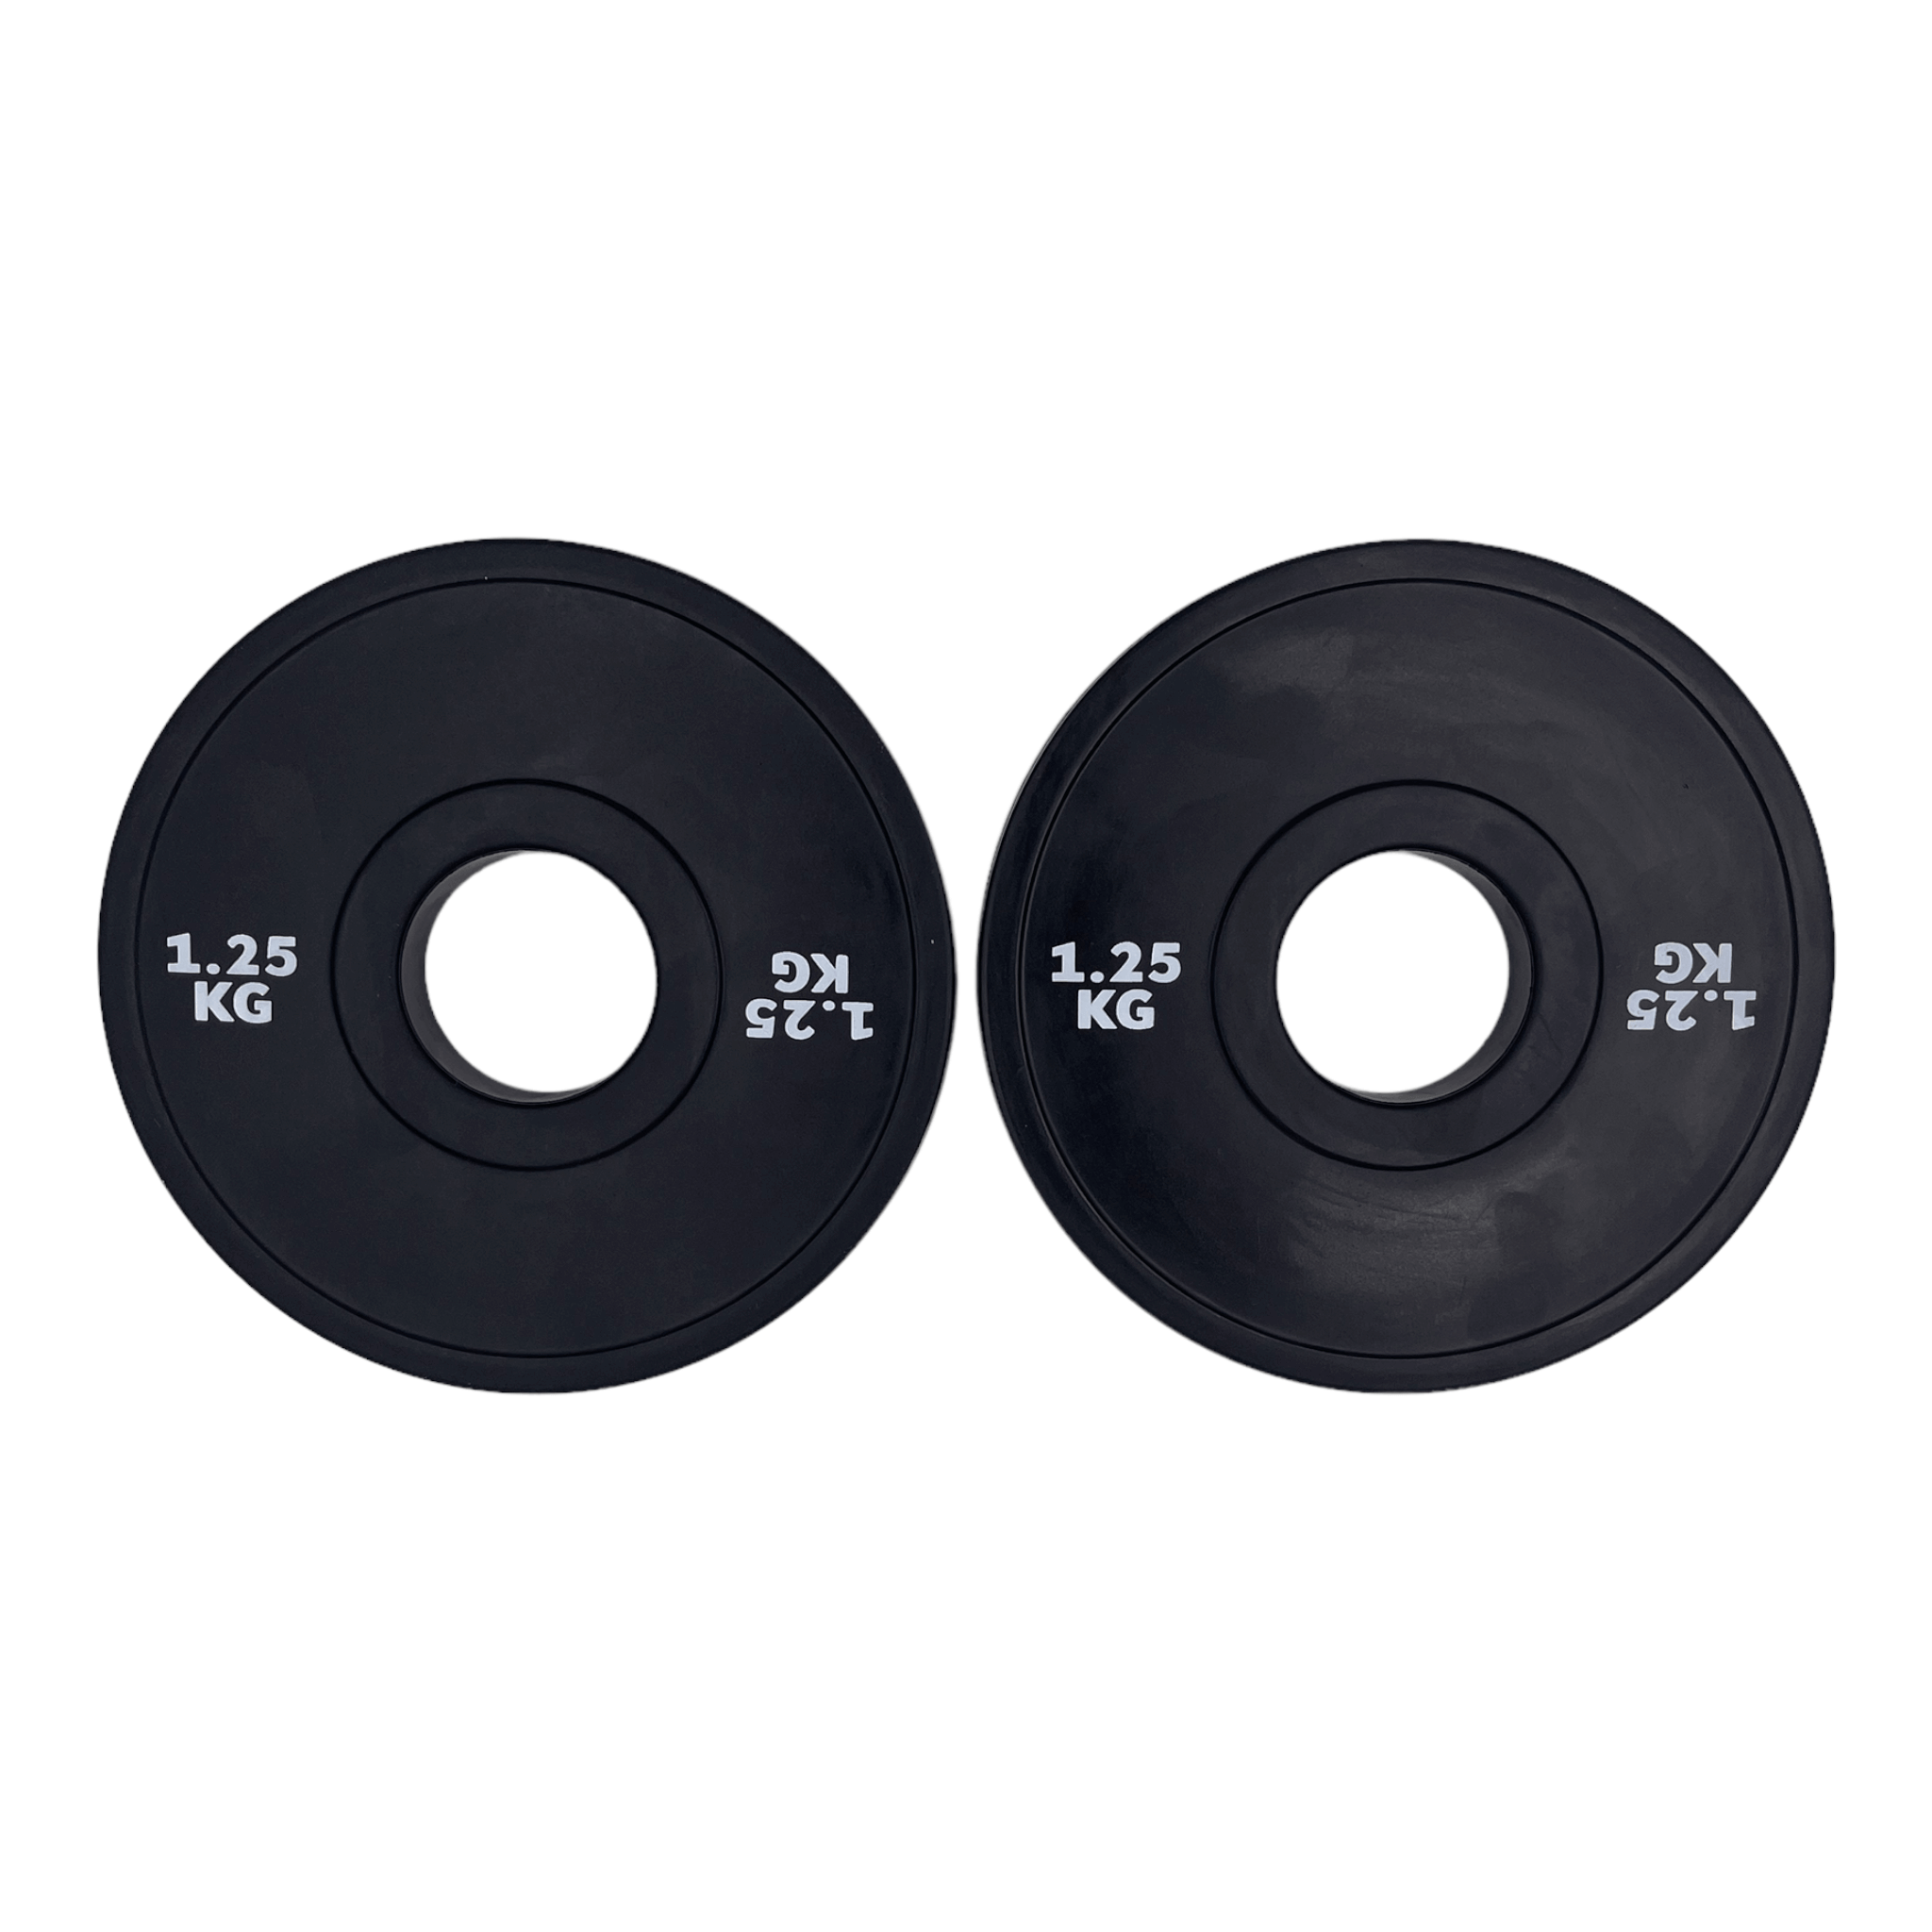 1.25kg Fractional Change Plates Rubber Weight Plates Pair | Fractional Change Plates | INSOURCE